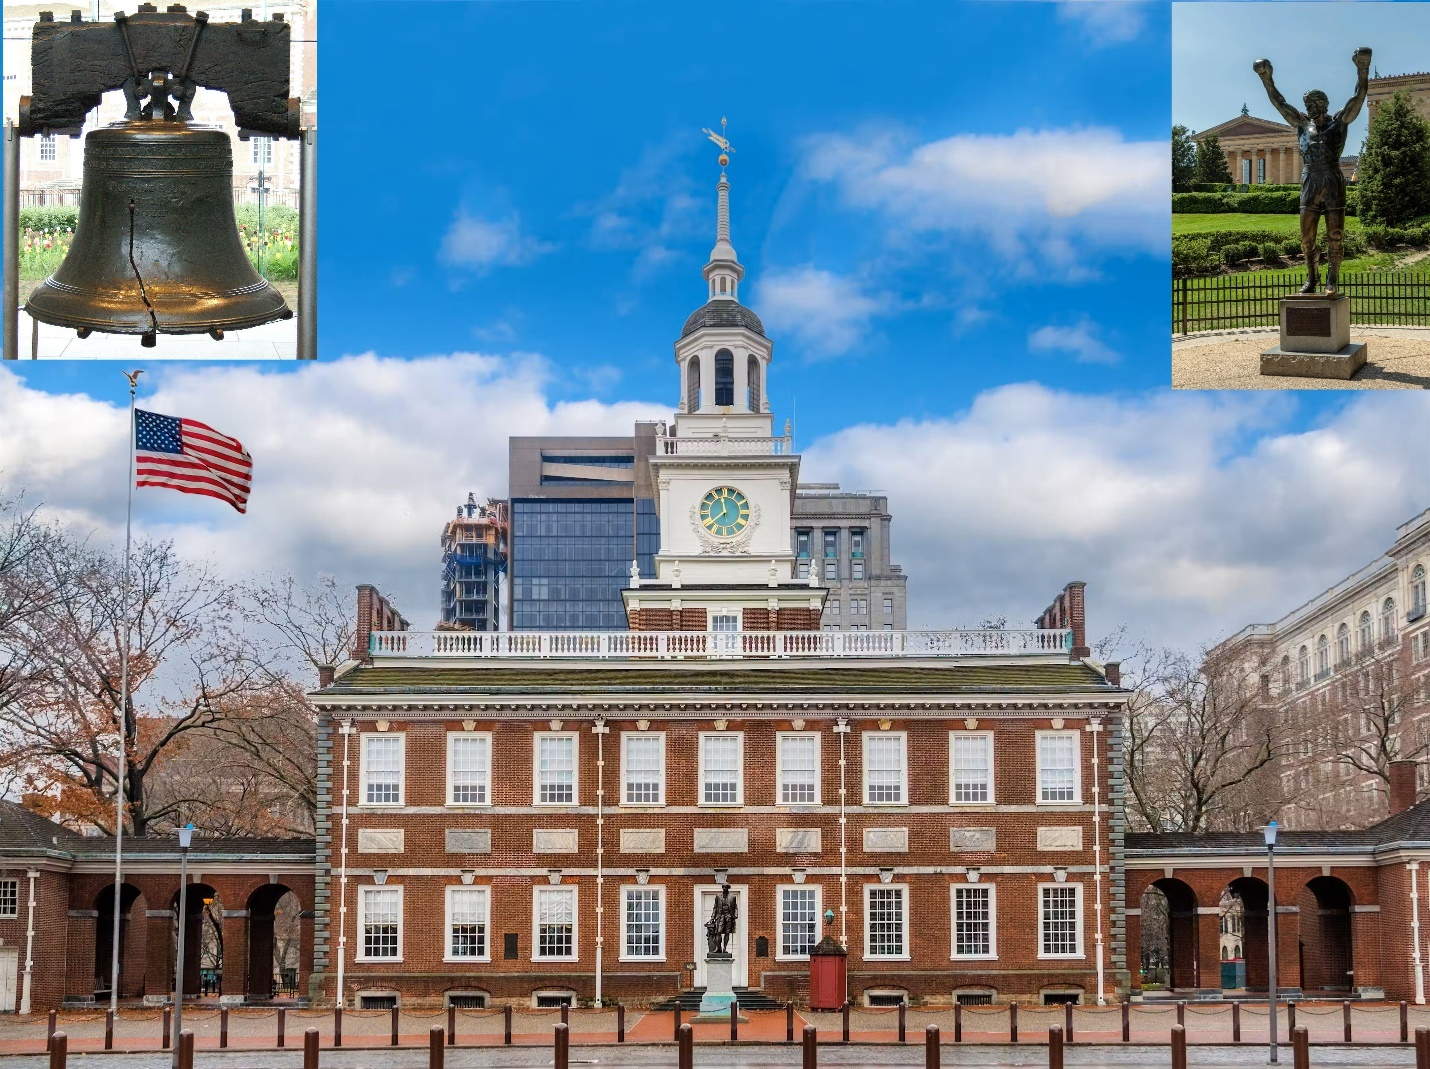 Join Us in Philadelphia, PA for our 61st Annual Eastern Finance Association Meeting